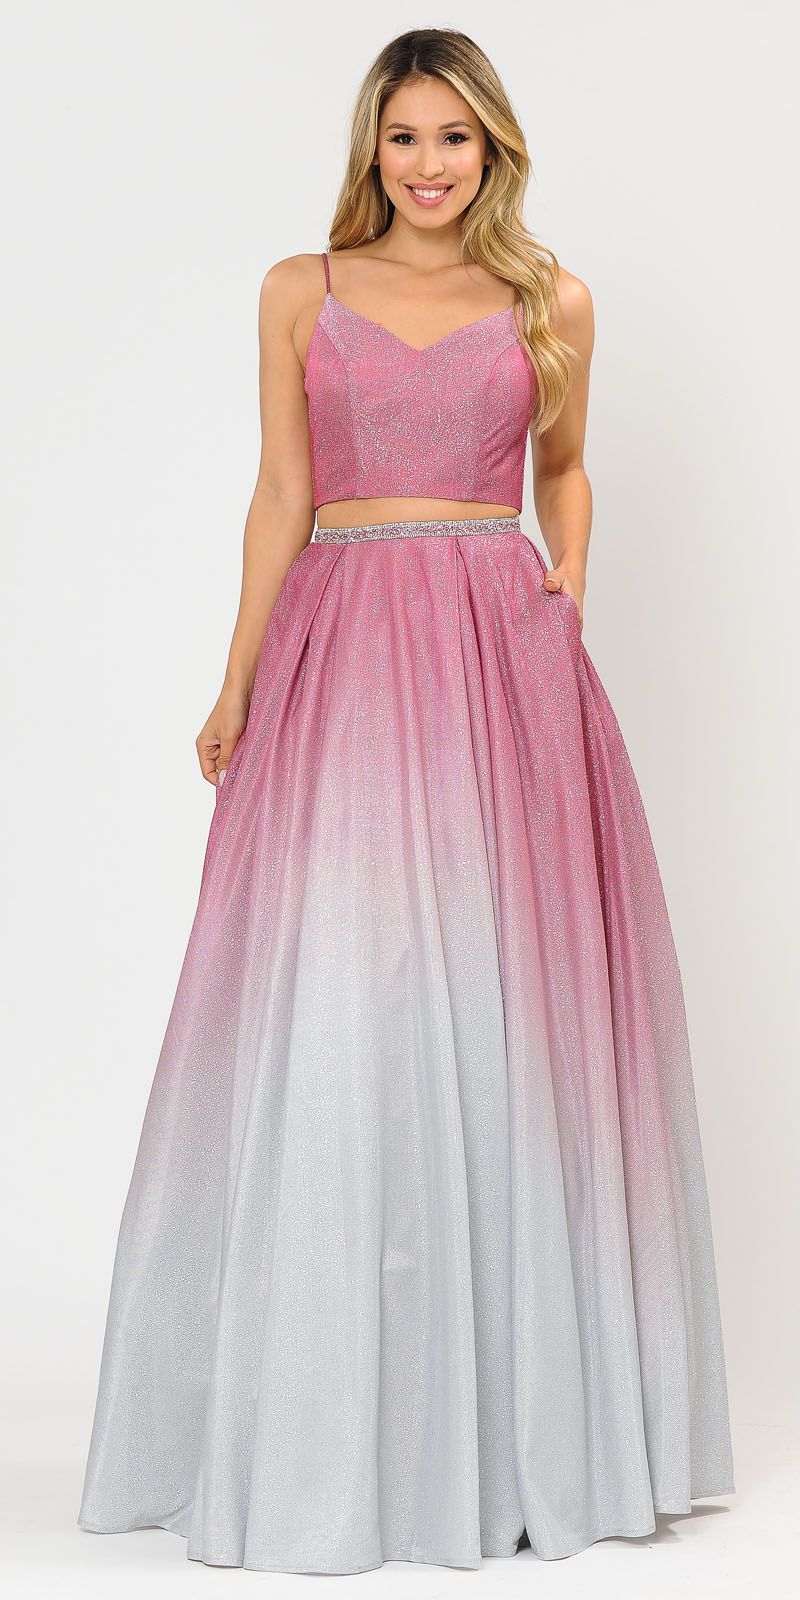 Ombre Two-Piece Long Prom Dress with Pockets Rose